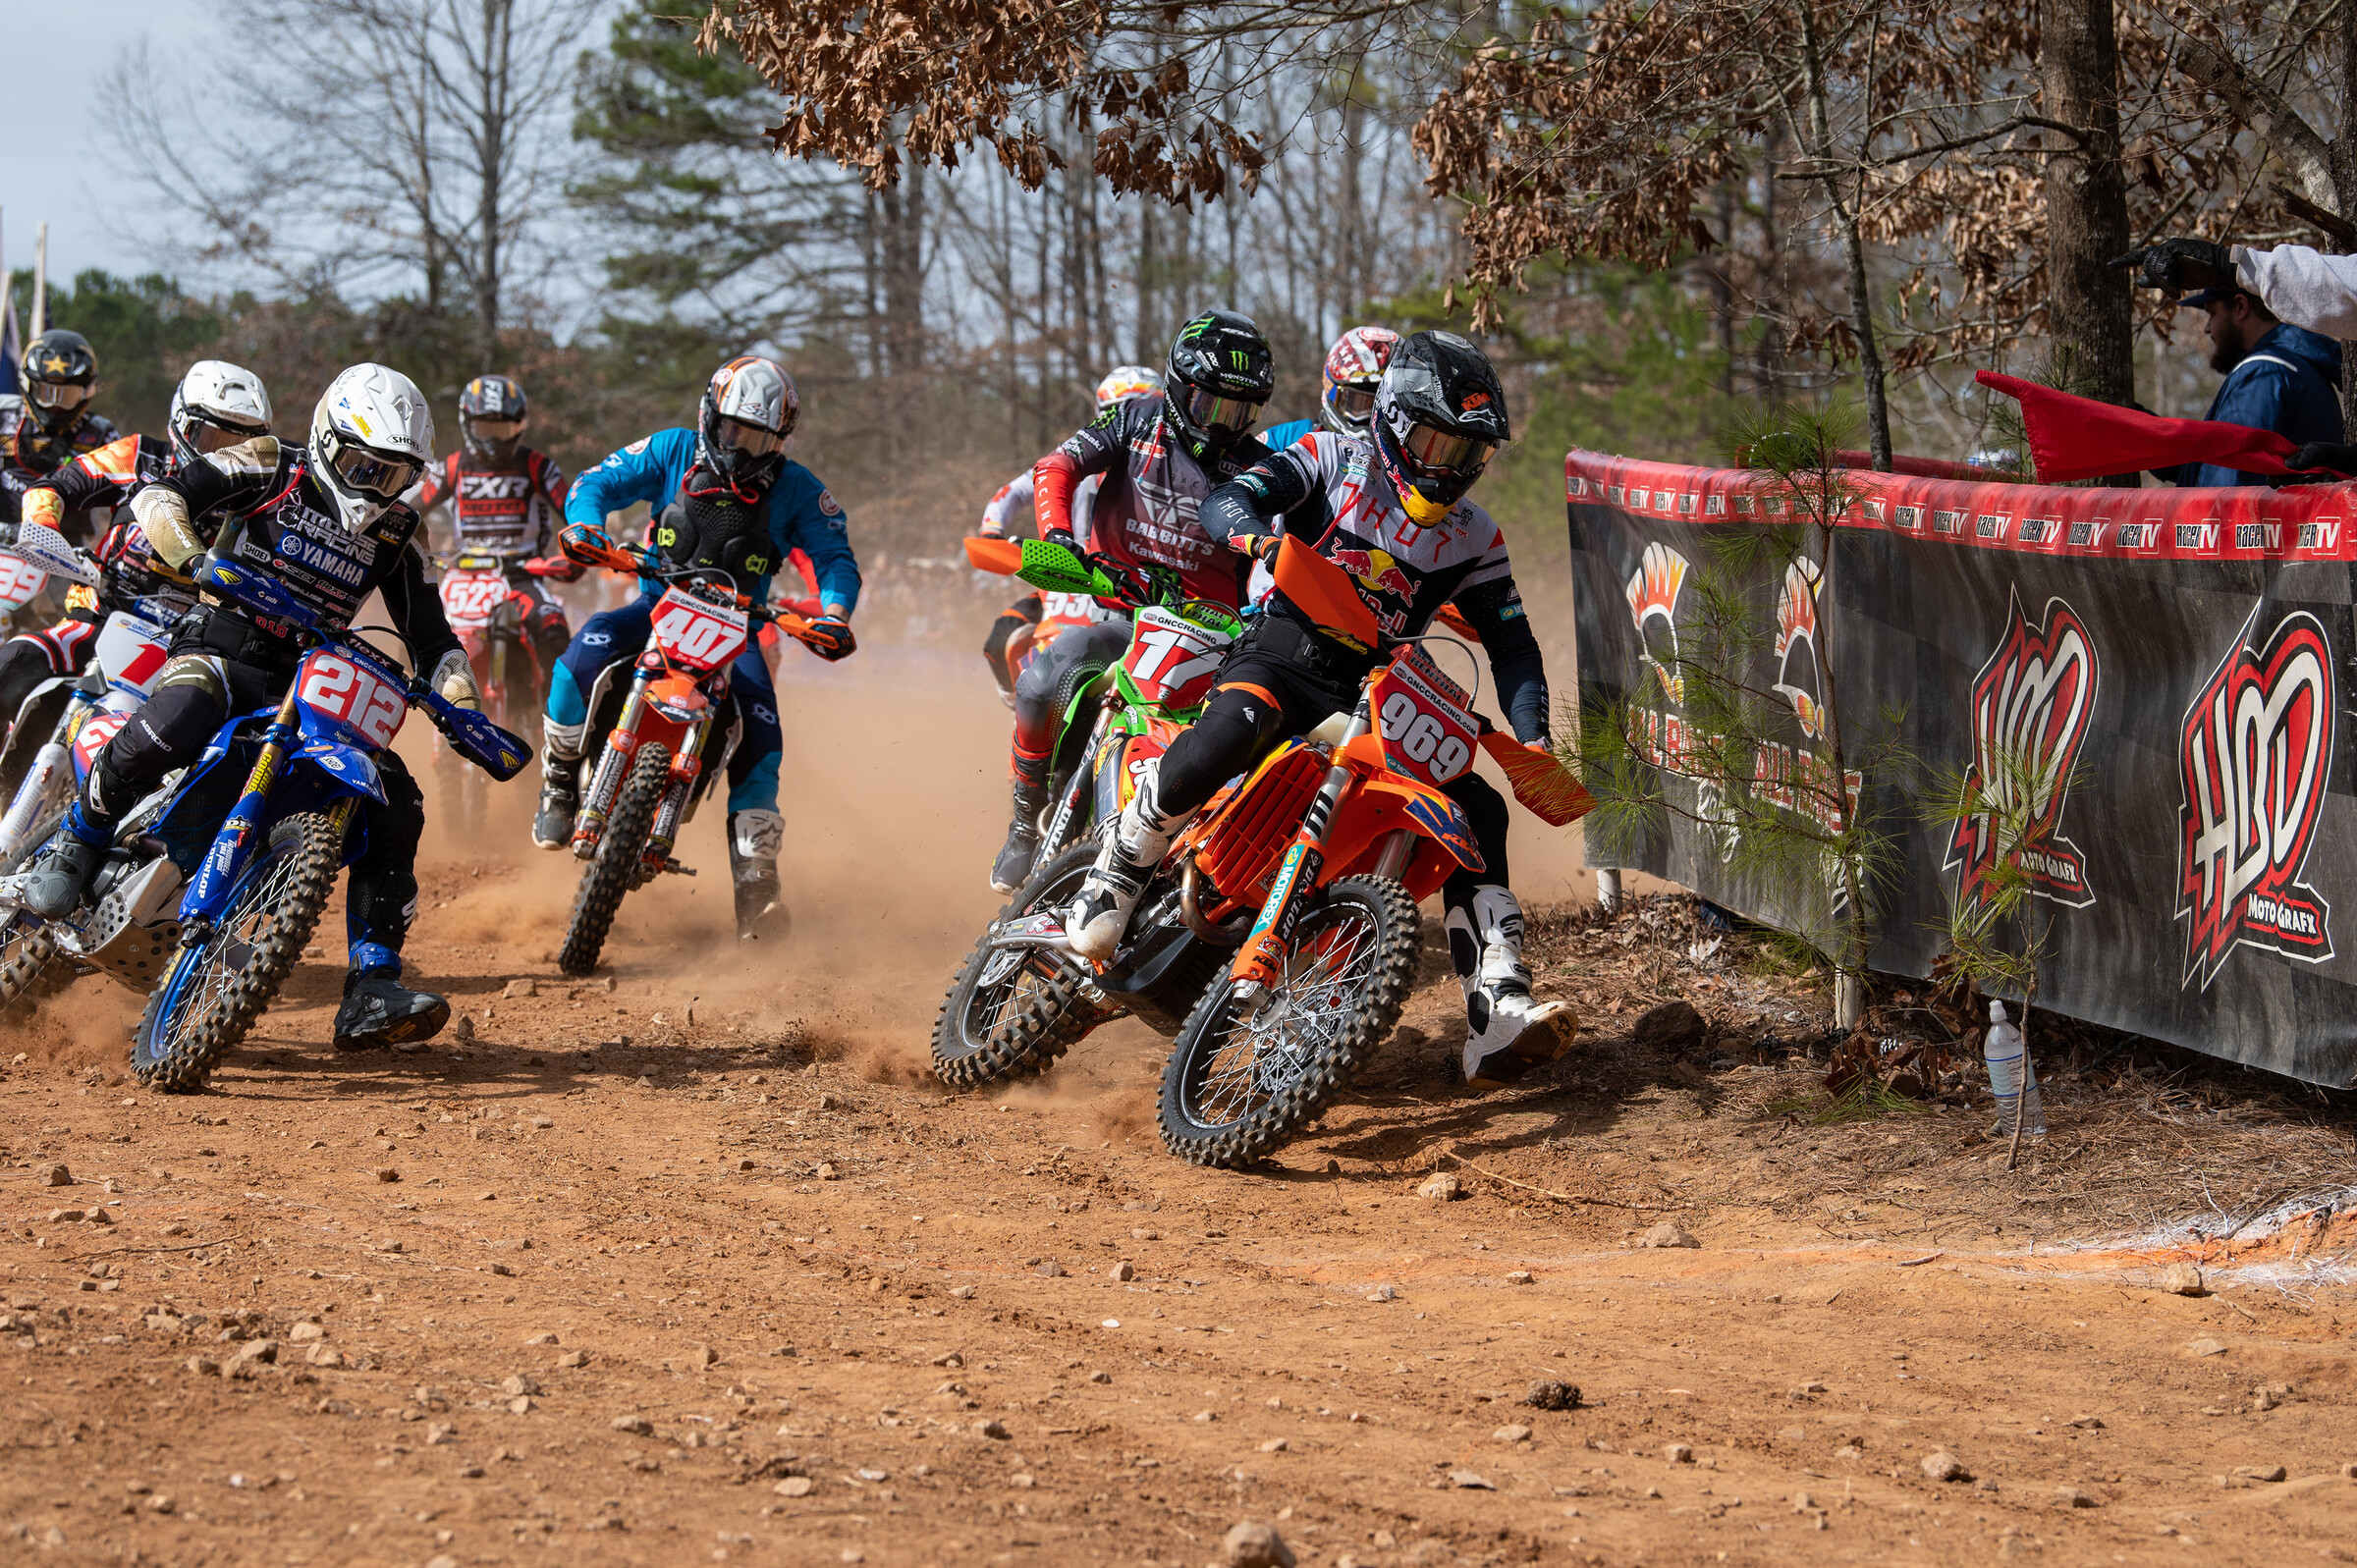 Steward Baylor Jr. (KTM) Claims First Overall GNCC Win of 2023 at Big